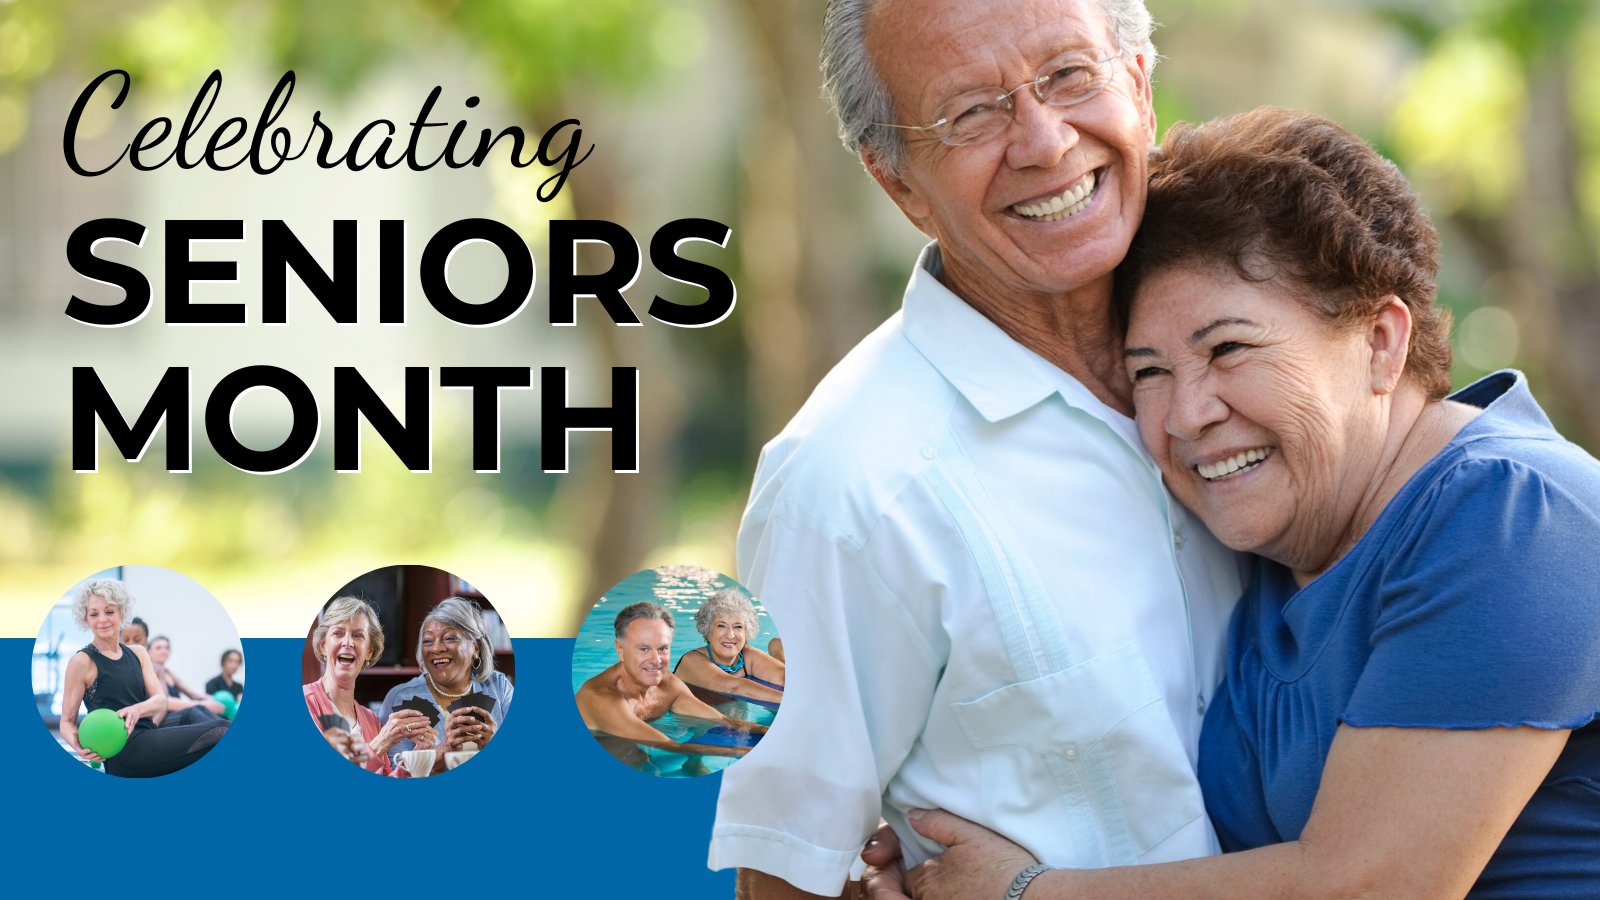 Celebrating Seniors Month with two seniors smiling and hugging.